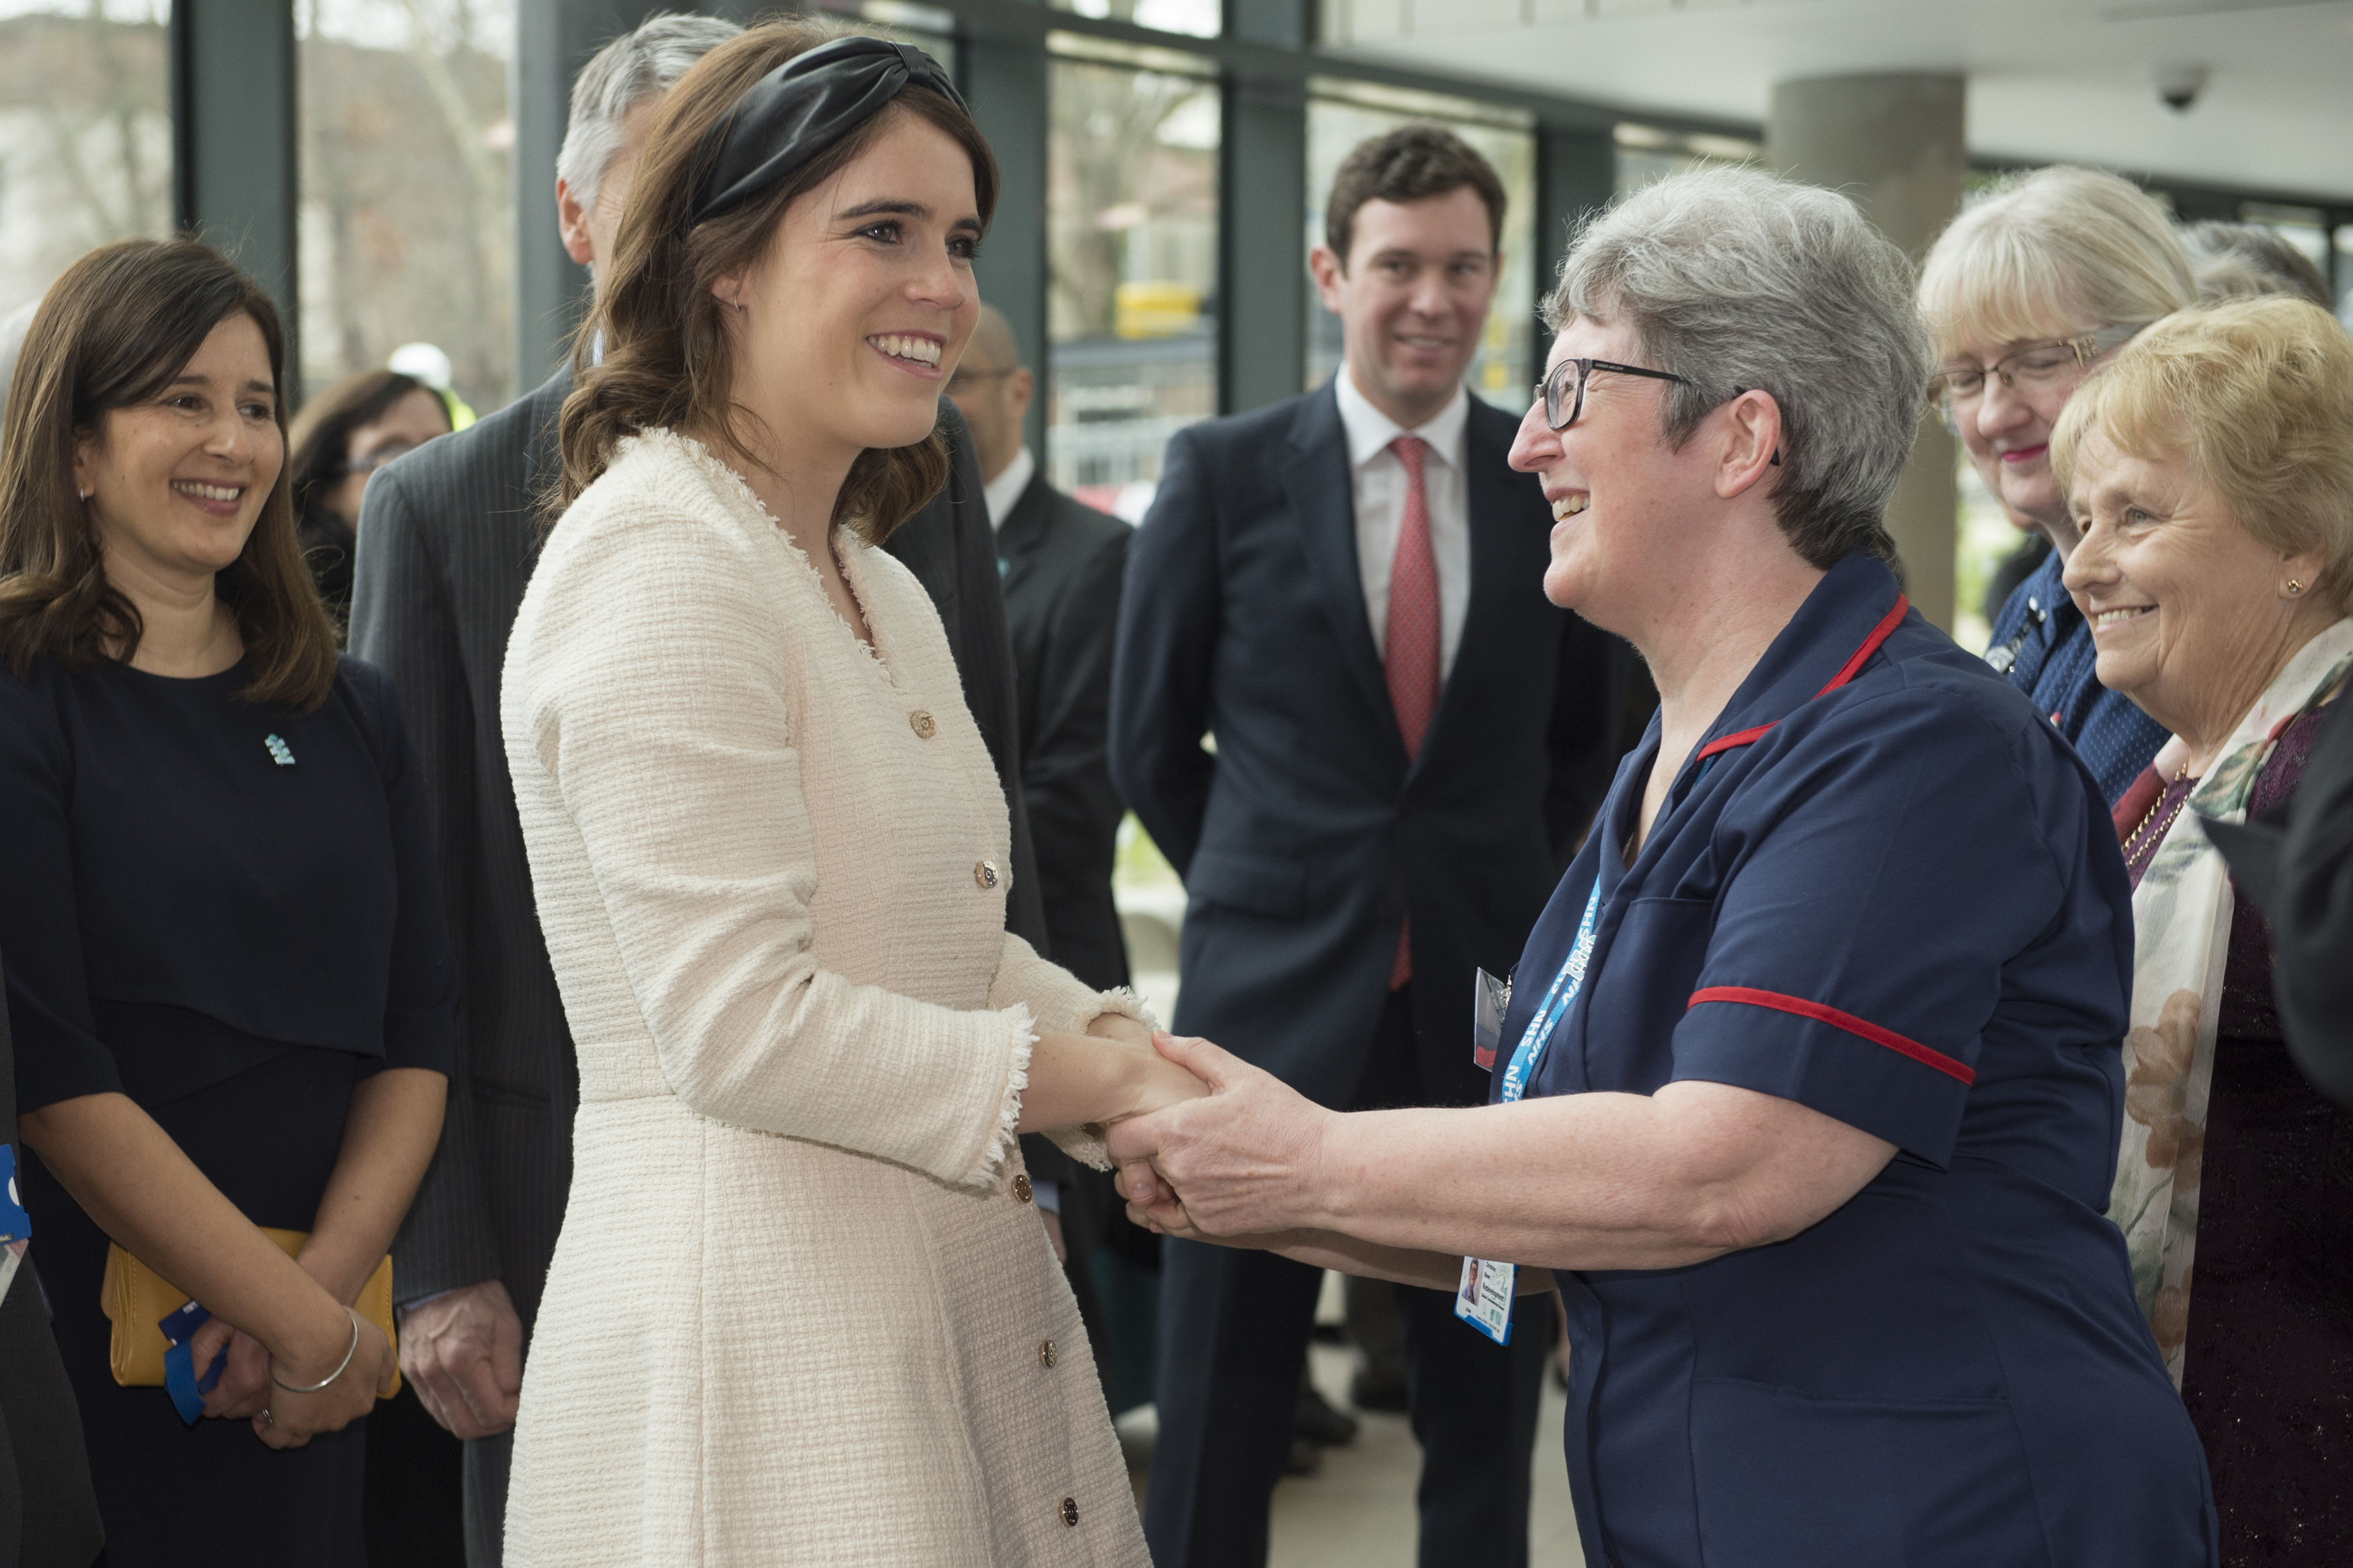 Princess Eugenie meets Ms. Christine Bows, who cared for her as a child, during a visit to open the new Stanmore Building at the Royal National Orthopaedic Hospital (RNOH) on March 21, 2019. | Source: Getty Images